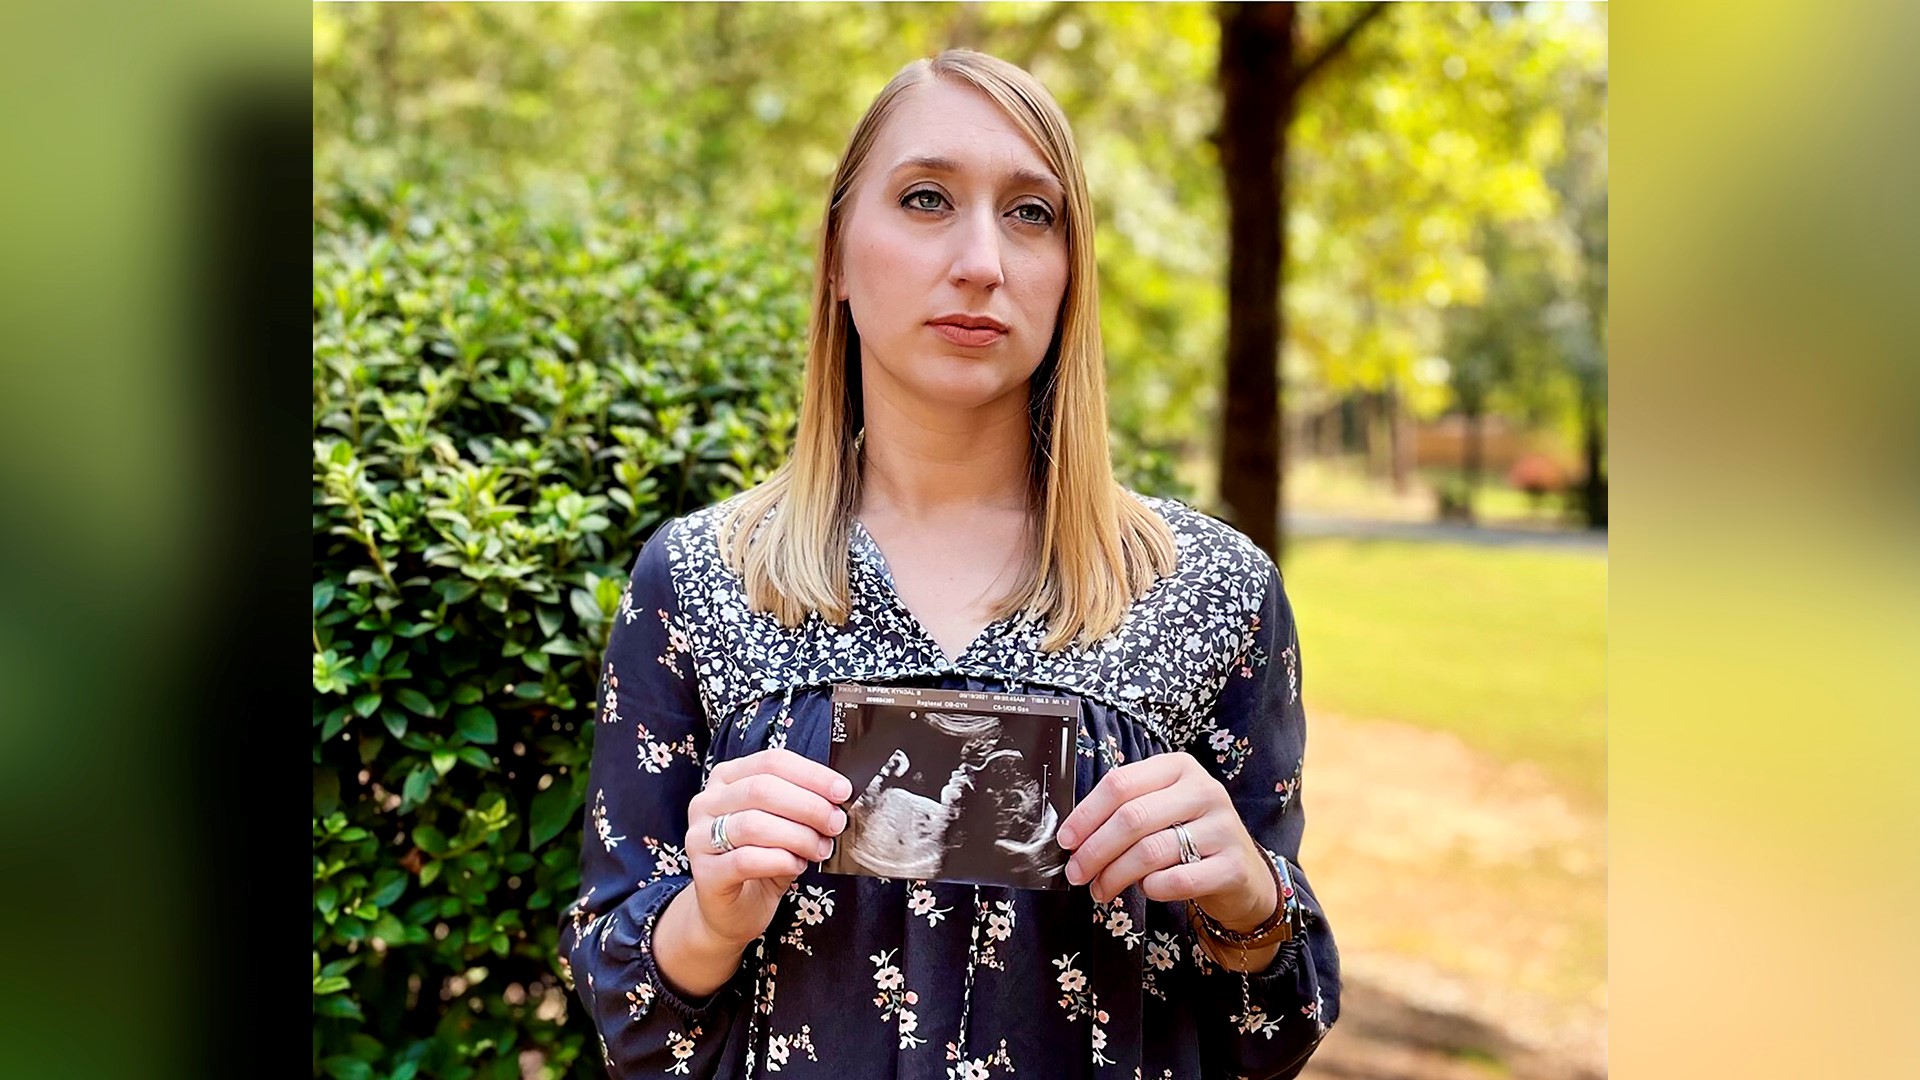 Two women from Georgia and Alabama who contracted COVID-19 during their pregnancies are urging other pregnant women to get vaccinated.